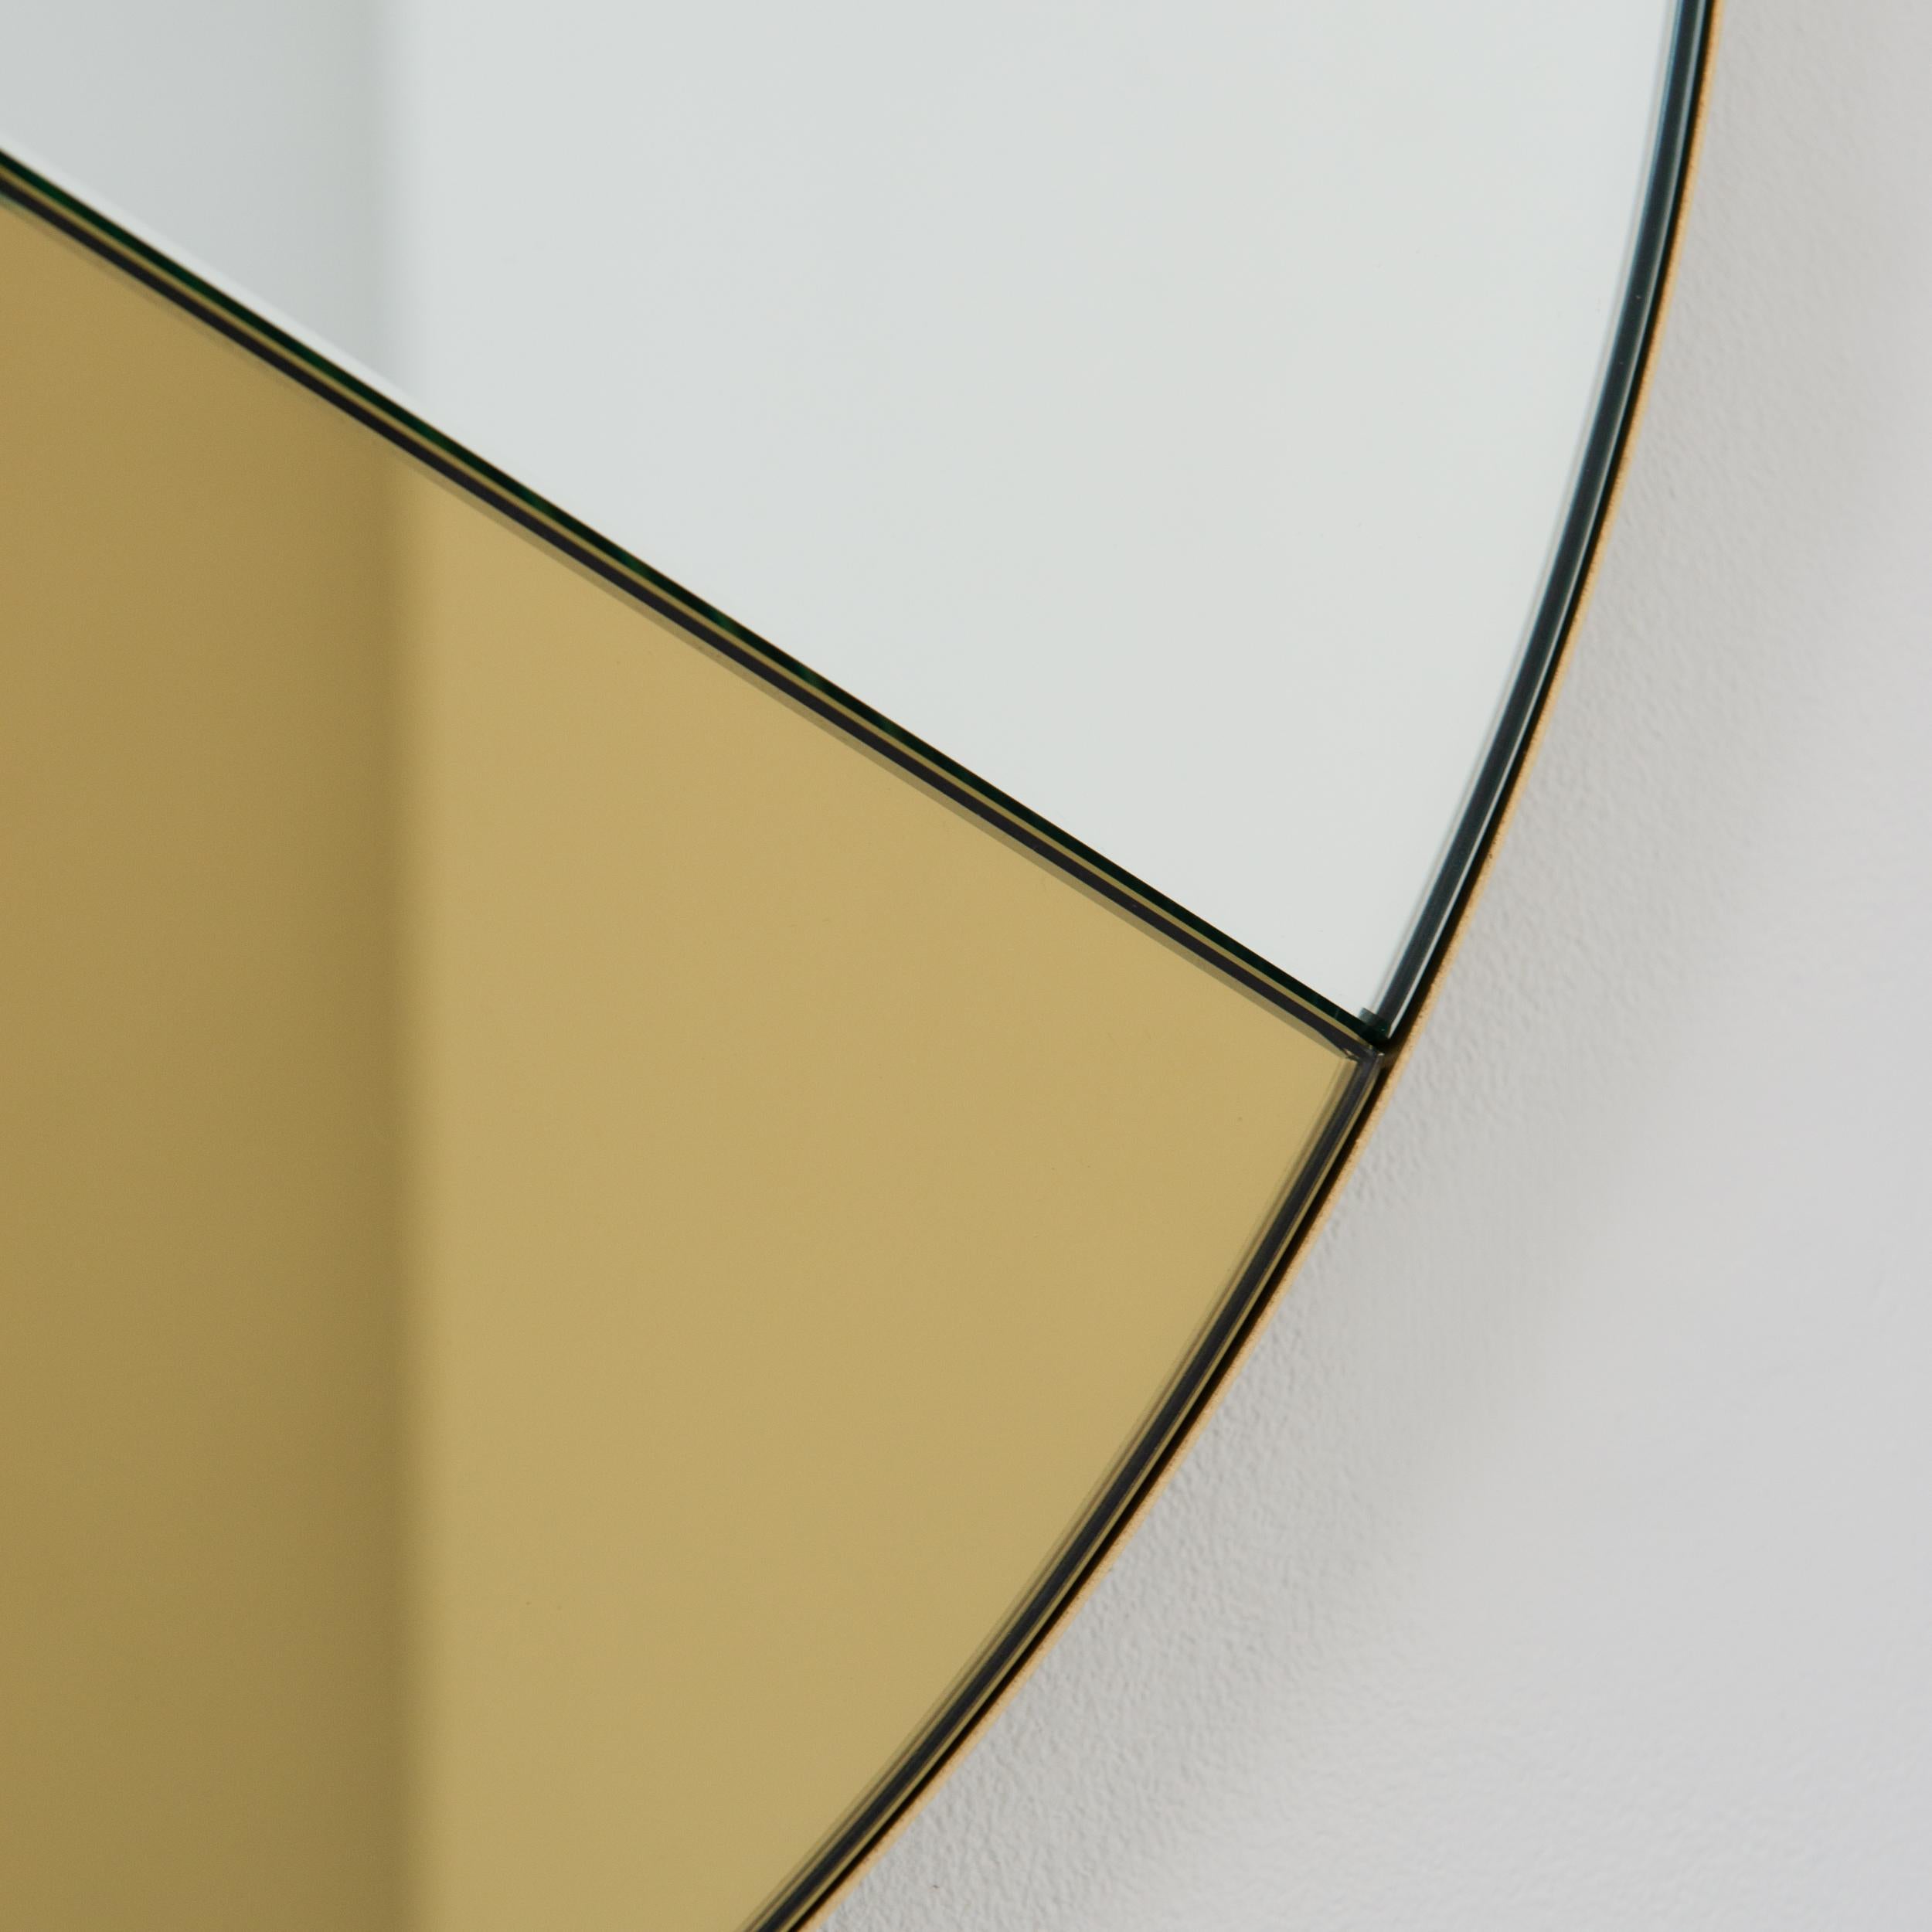 In Stock Orbis Dualis Round Gold Silver Tinted Mirror, Brass Frame, Medium For Sale 1